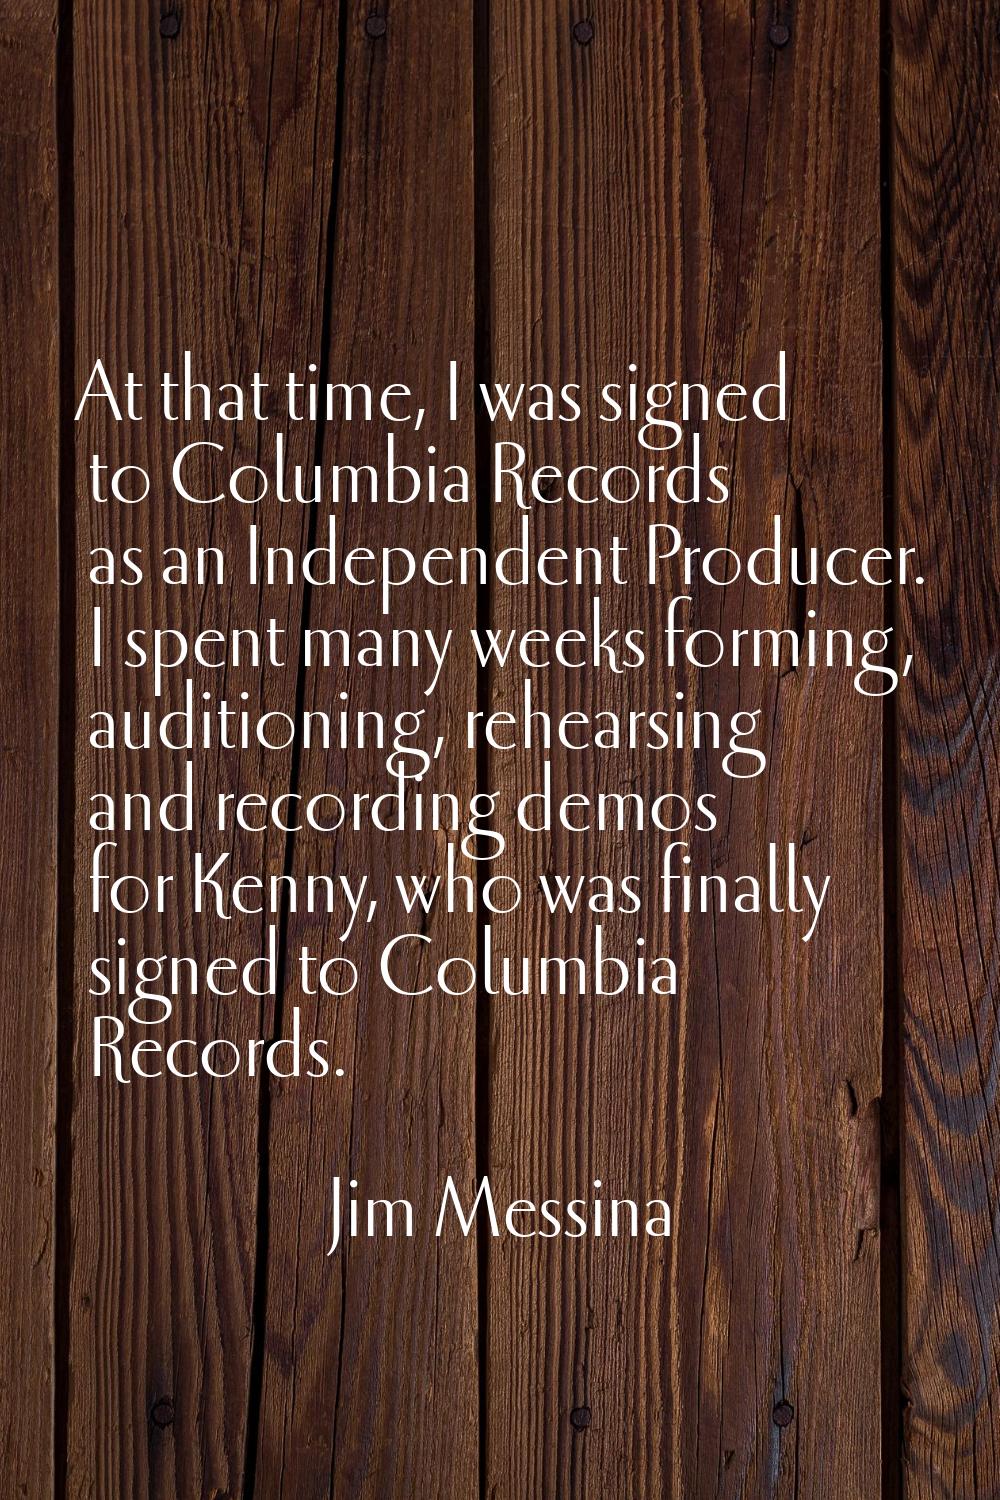 At that time, I was signed to Columbia Records as an Independent Producer. I spent many weeks formi